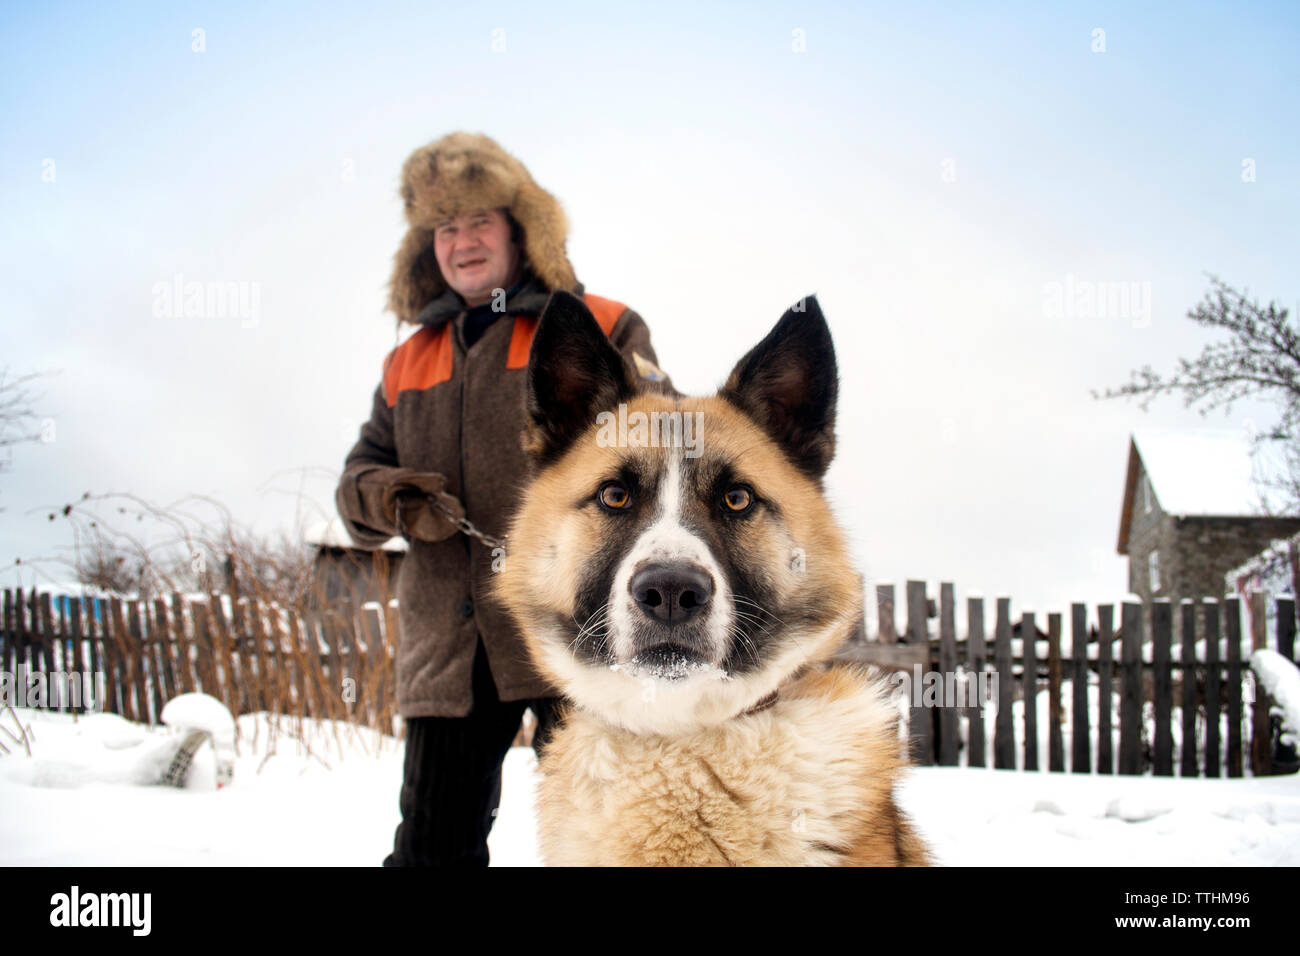 Portrait of man and dog on snow covered field Stock Photo